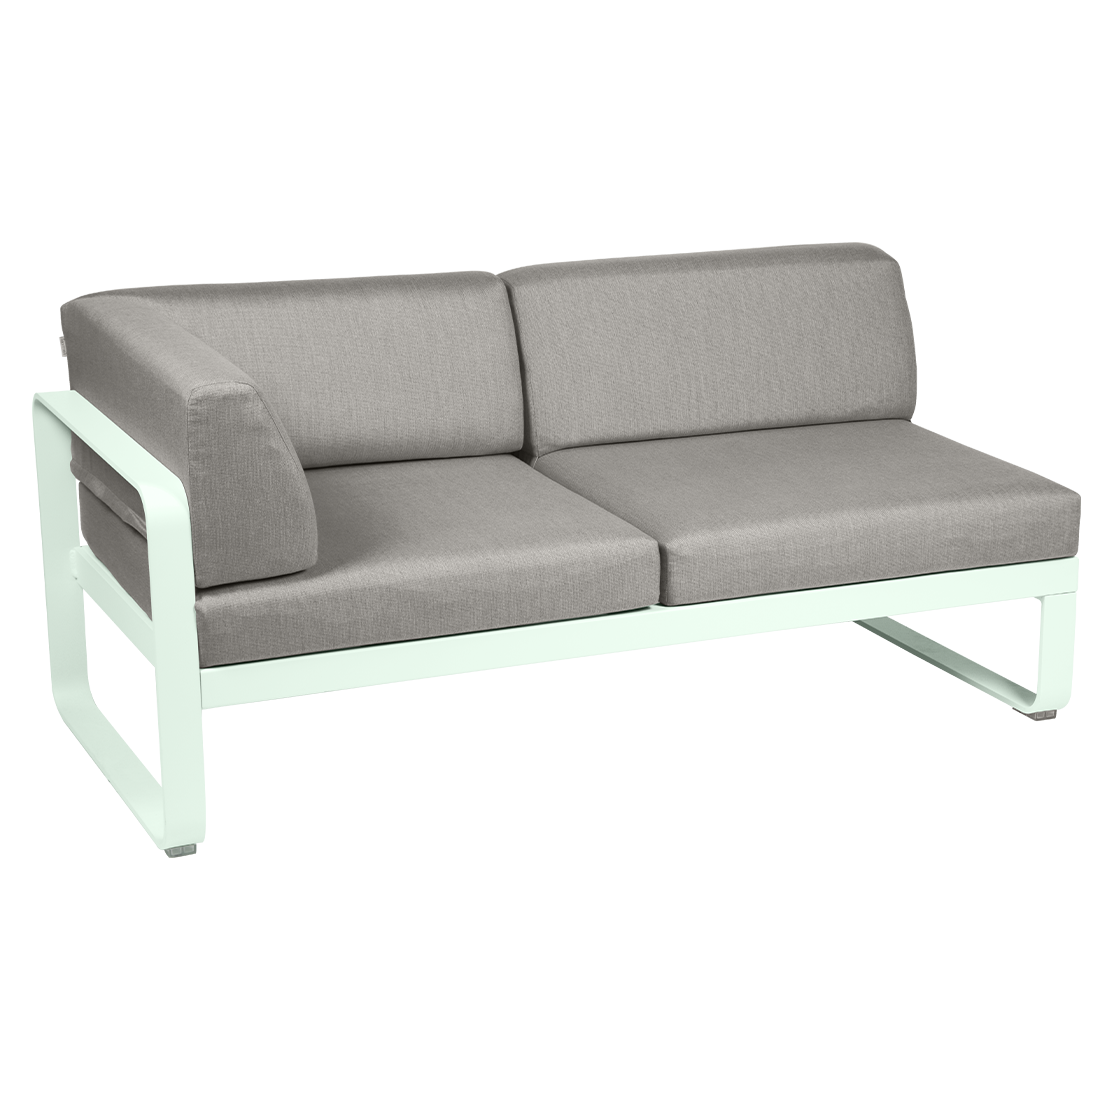 2-seater corner element BELLEVIE with side cushions - left